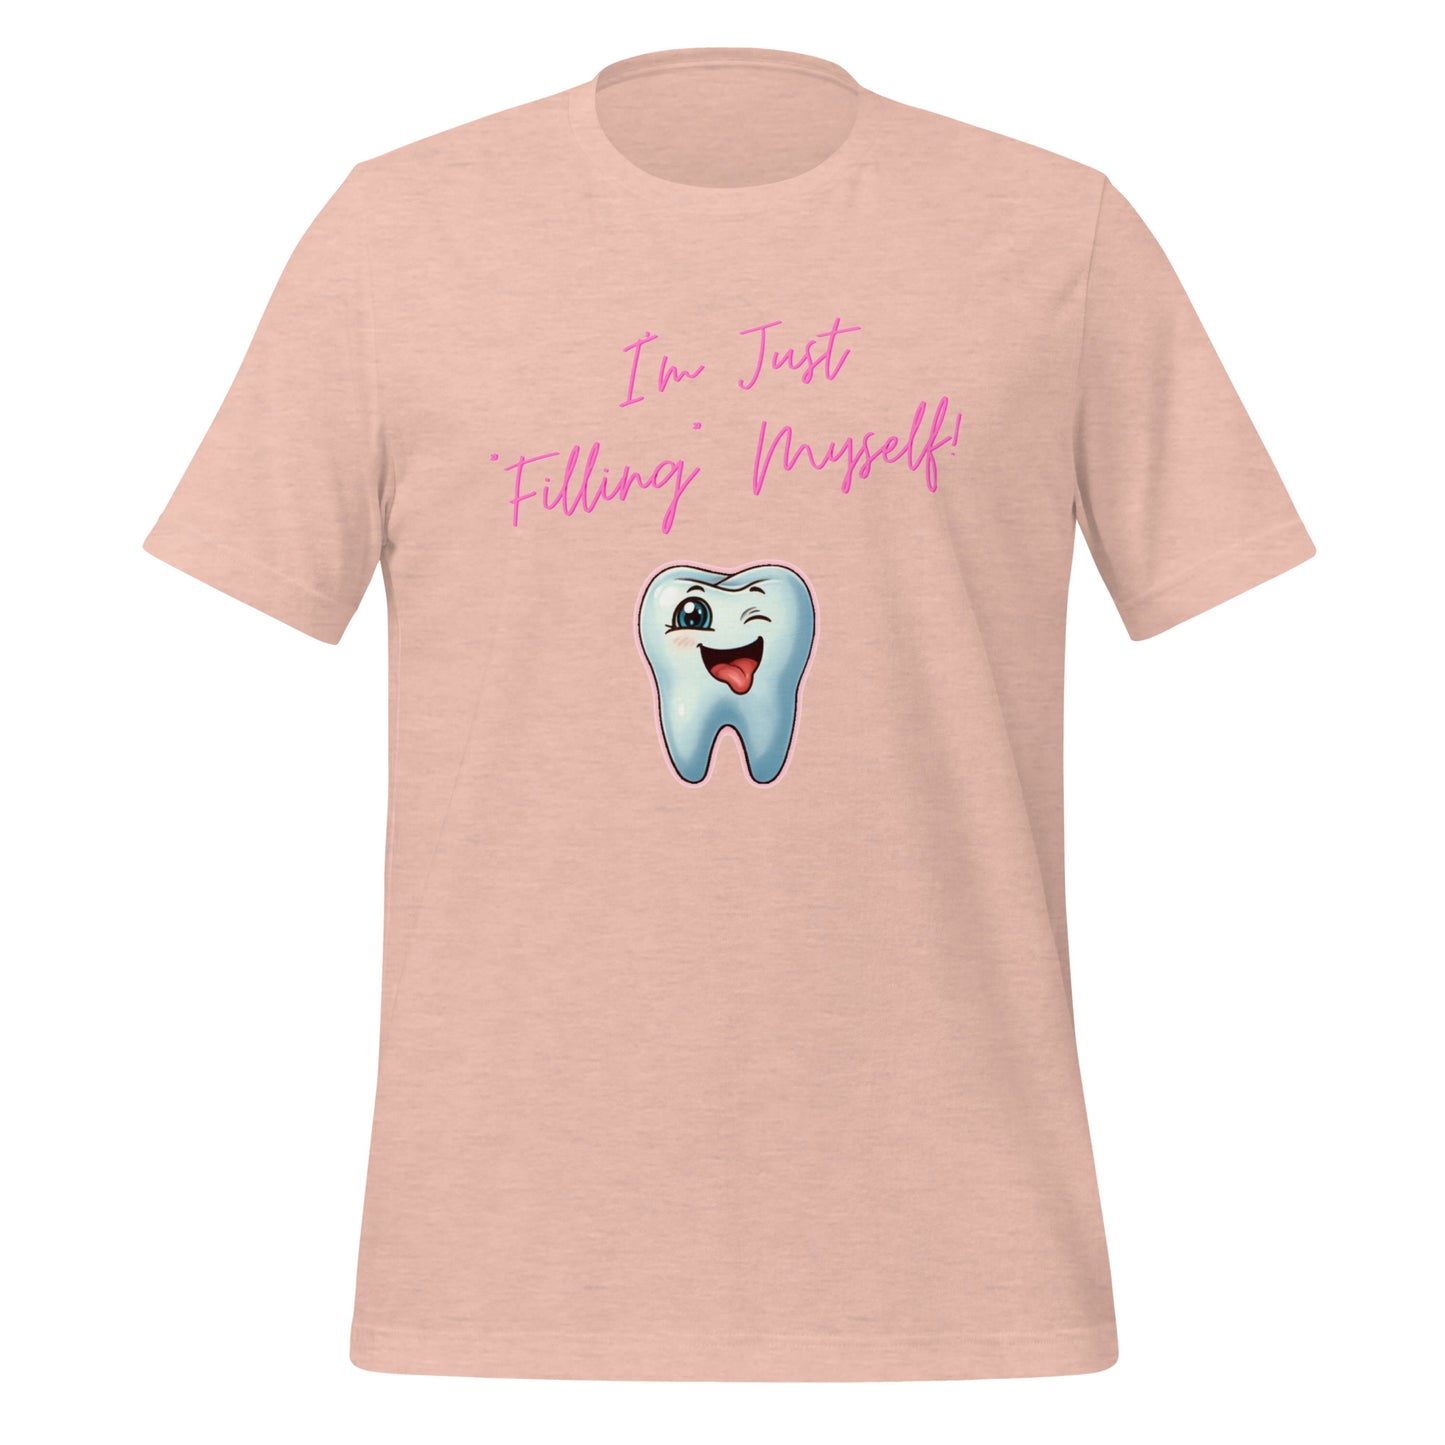 Flirtatious winking cartoon tooth character with the phrase "I'm just filling myself!" Ideal for a funny dental t-shirt or a cute dental assistant shirt. Heather prism peach color. 